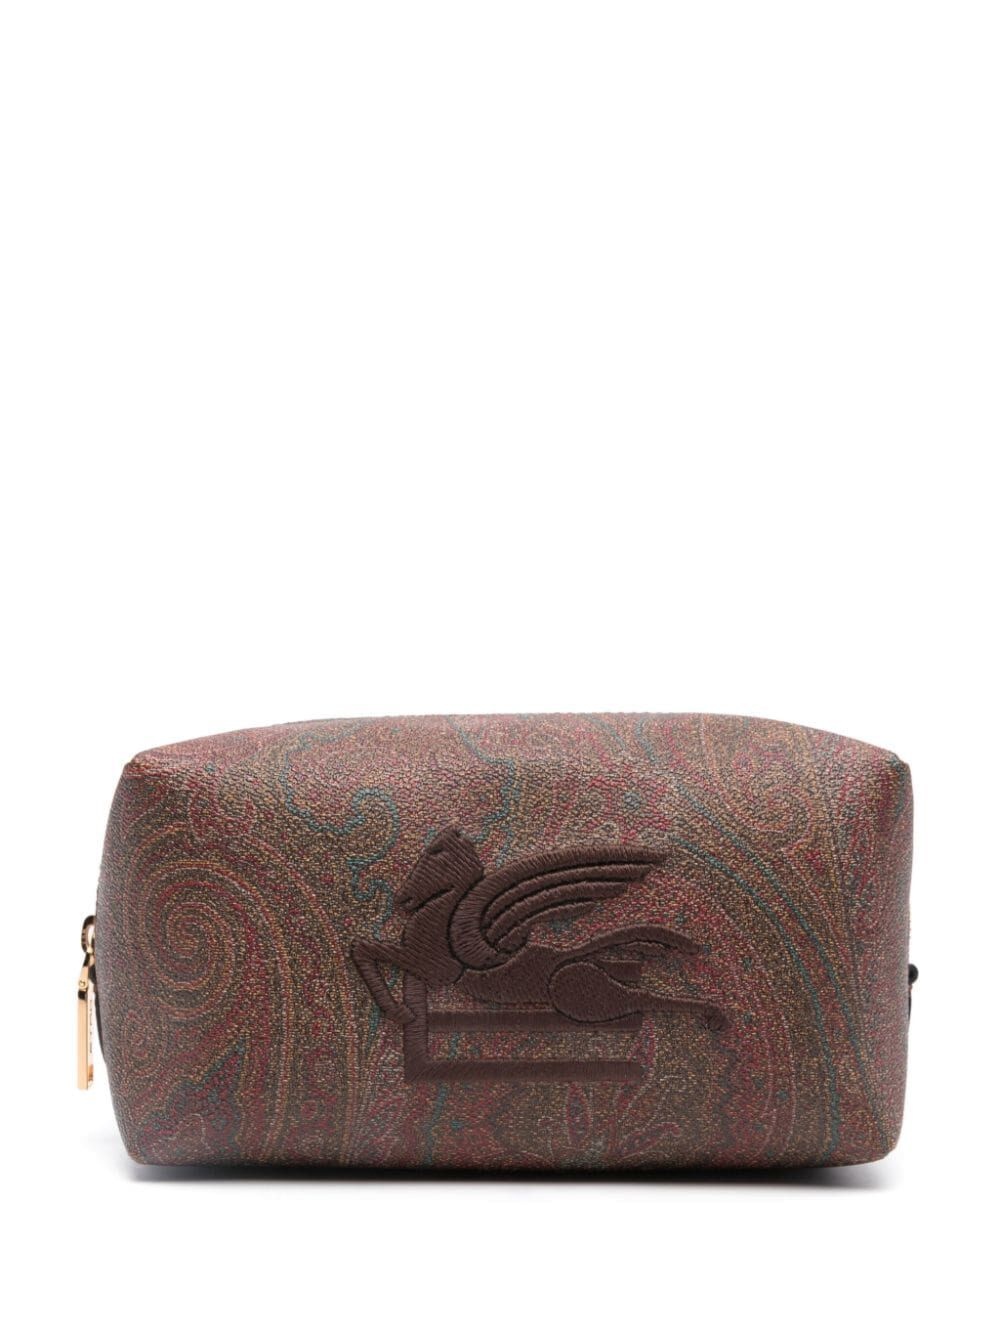 Paisley pouch - 1